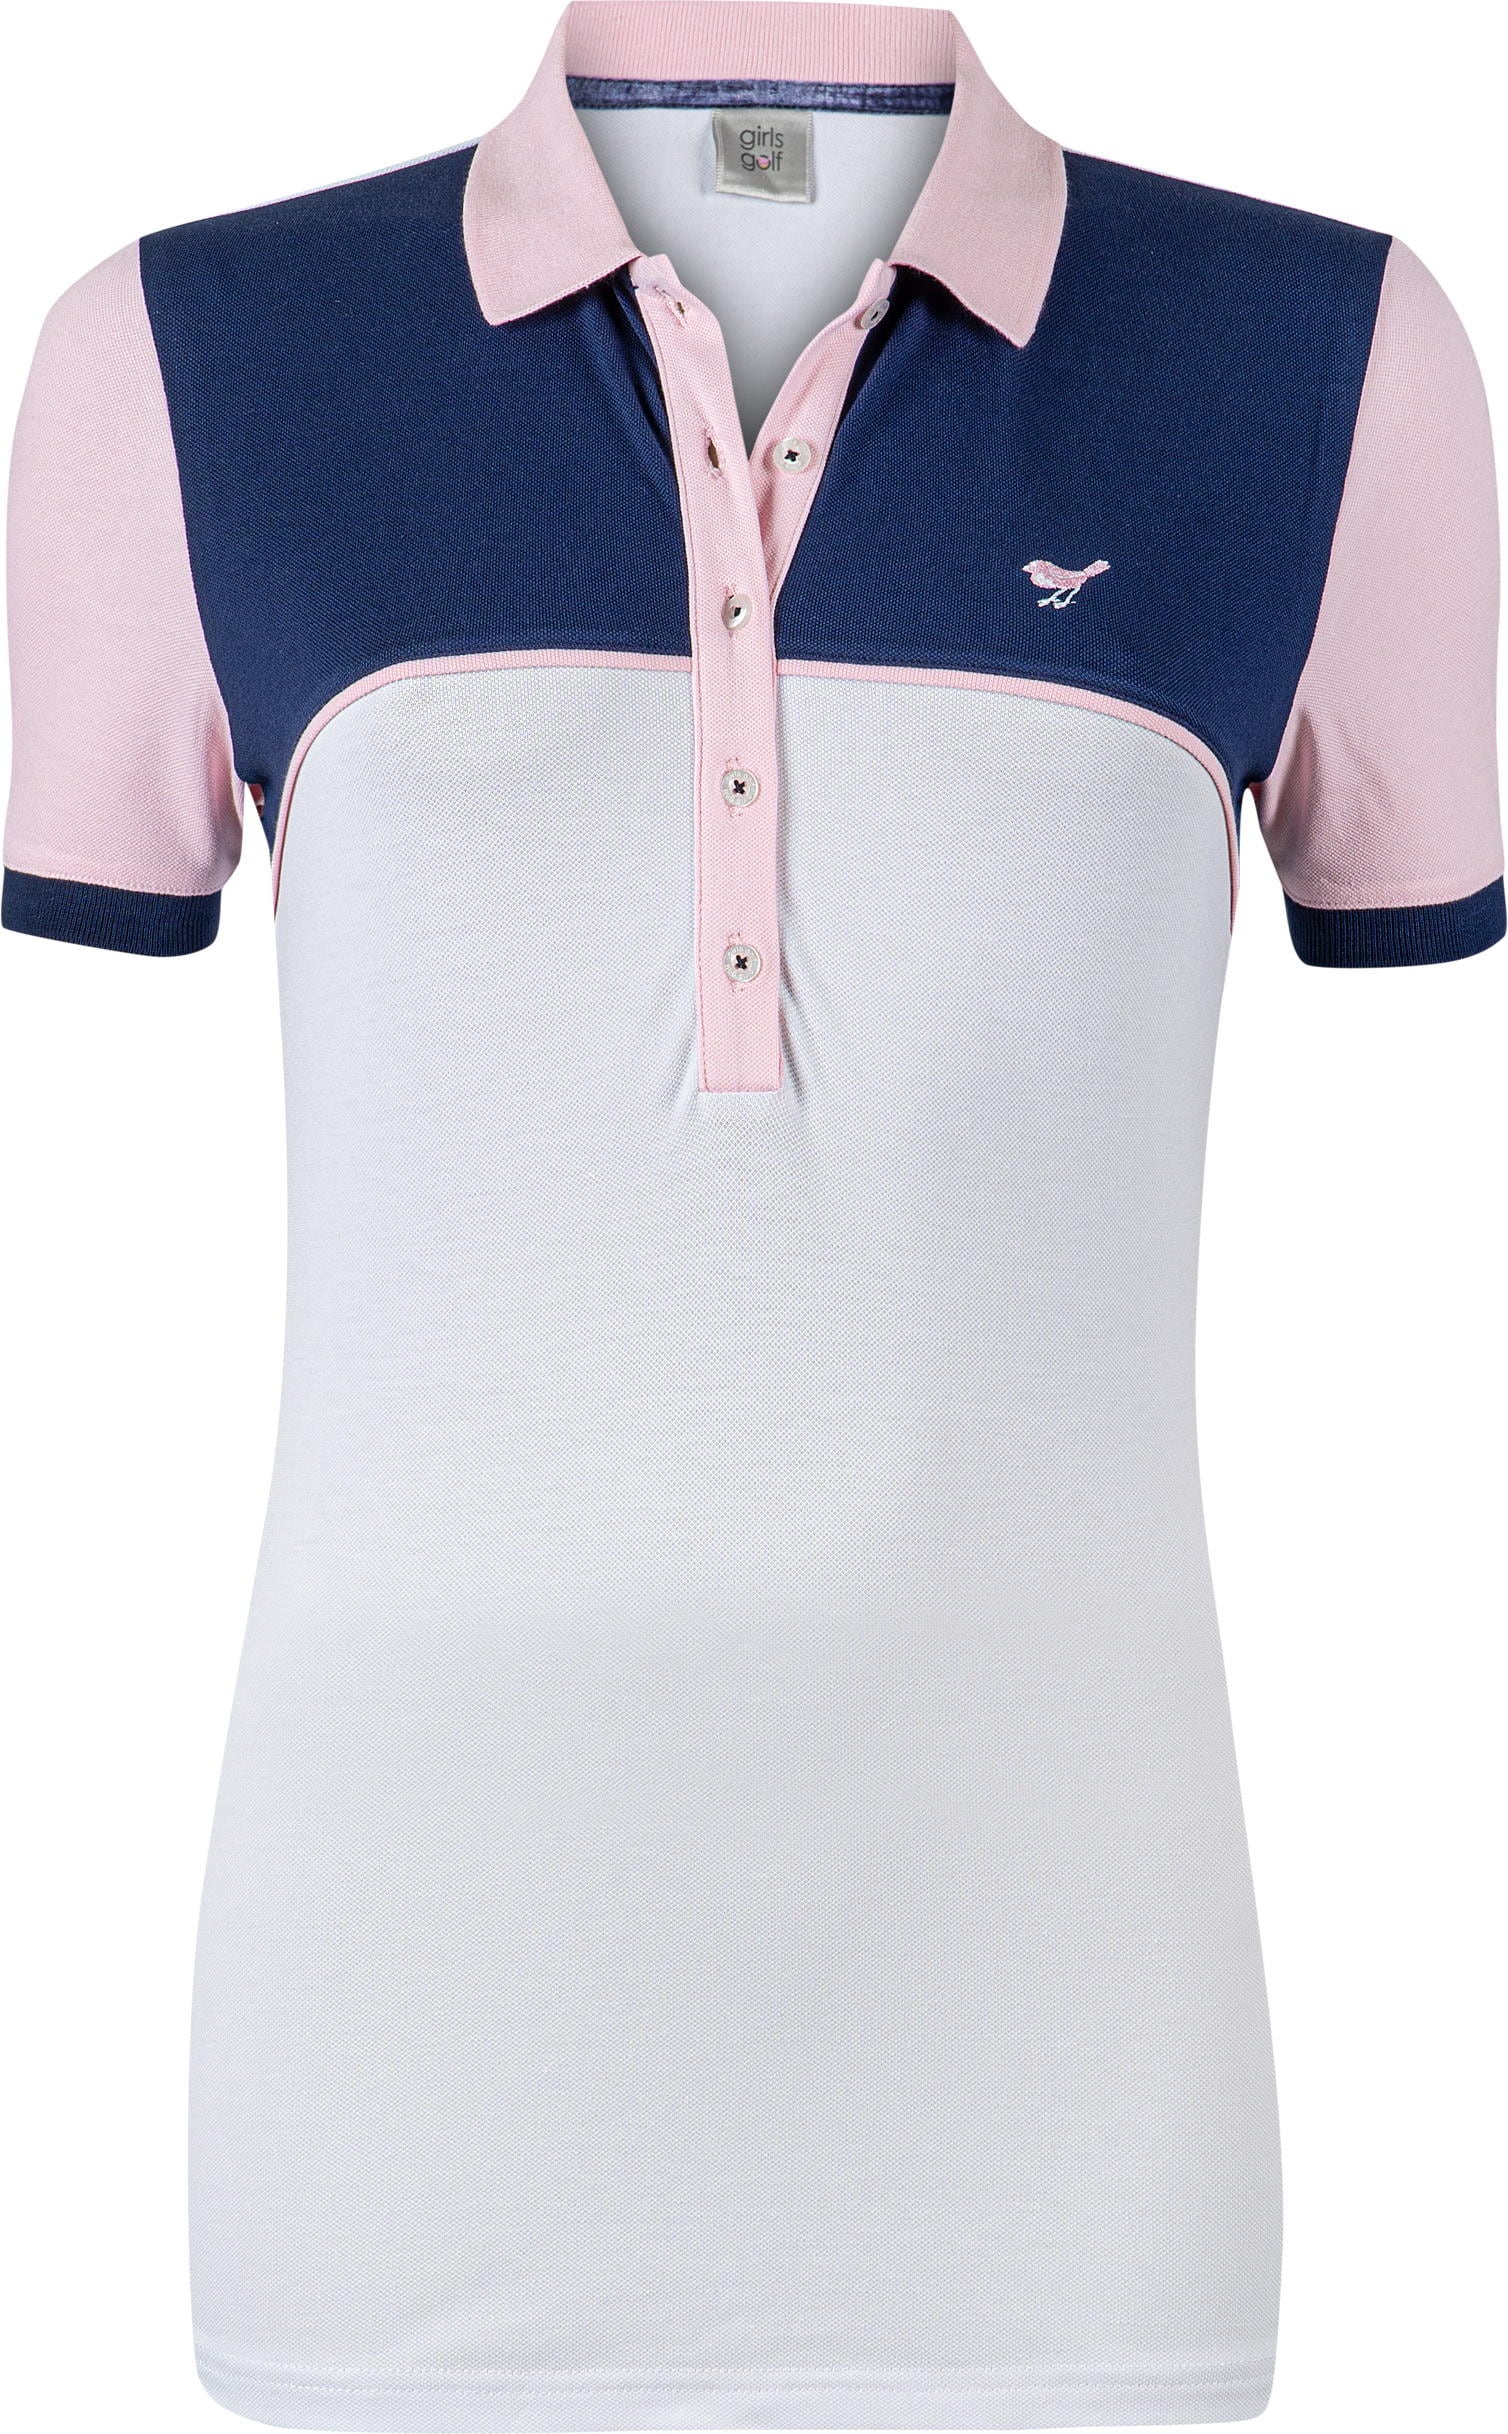 Girls Golf Twinkle Polo, rose/white